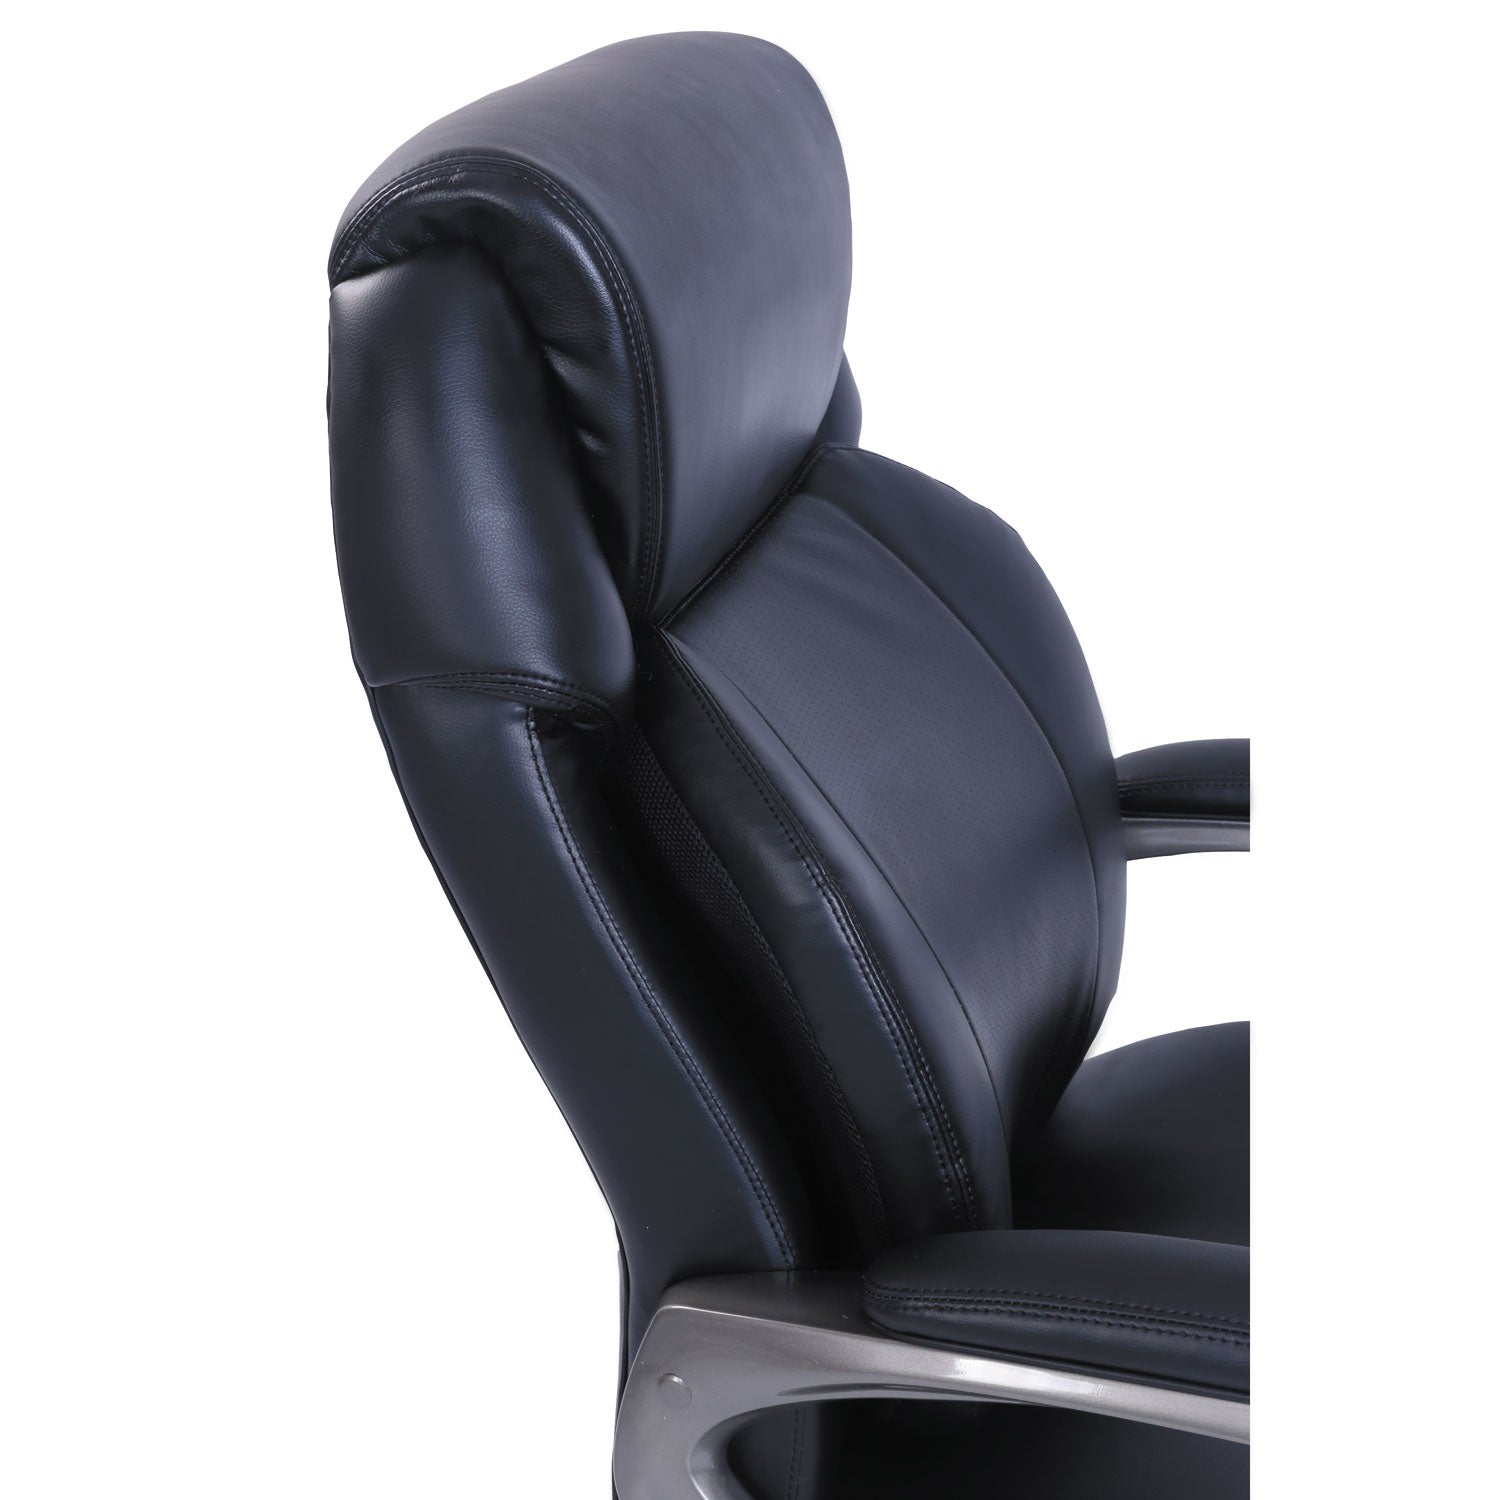 cosset-high-back-executive-chair-supports-up-to-275-lb-1875-to-2175-seat-height-black-seat-back-slate-base_srj48965 - 3